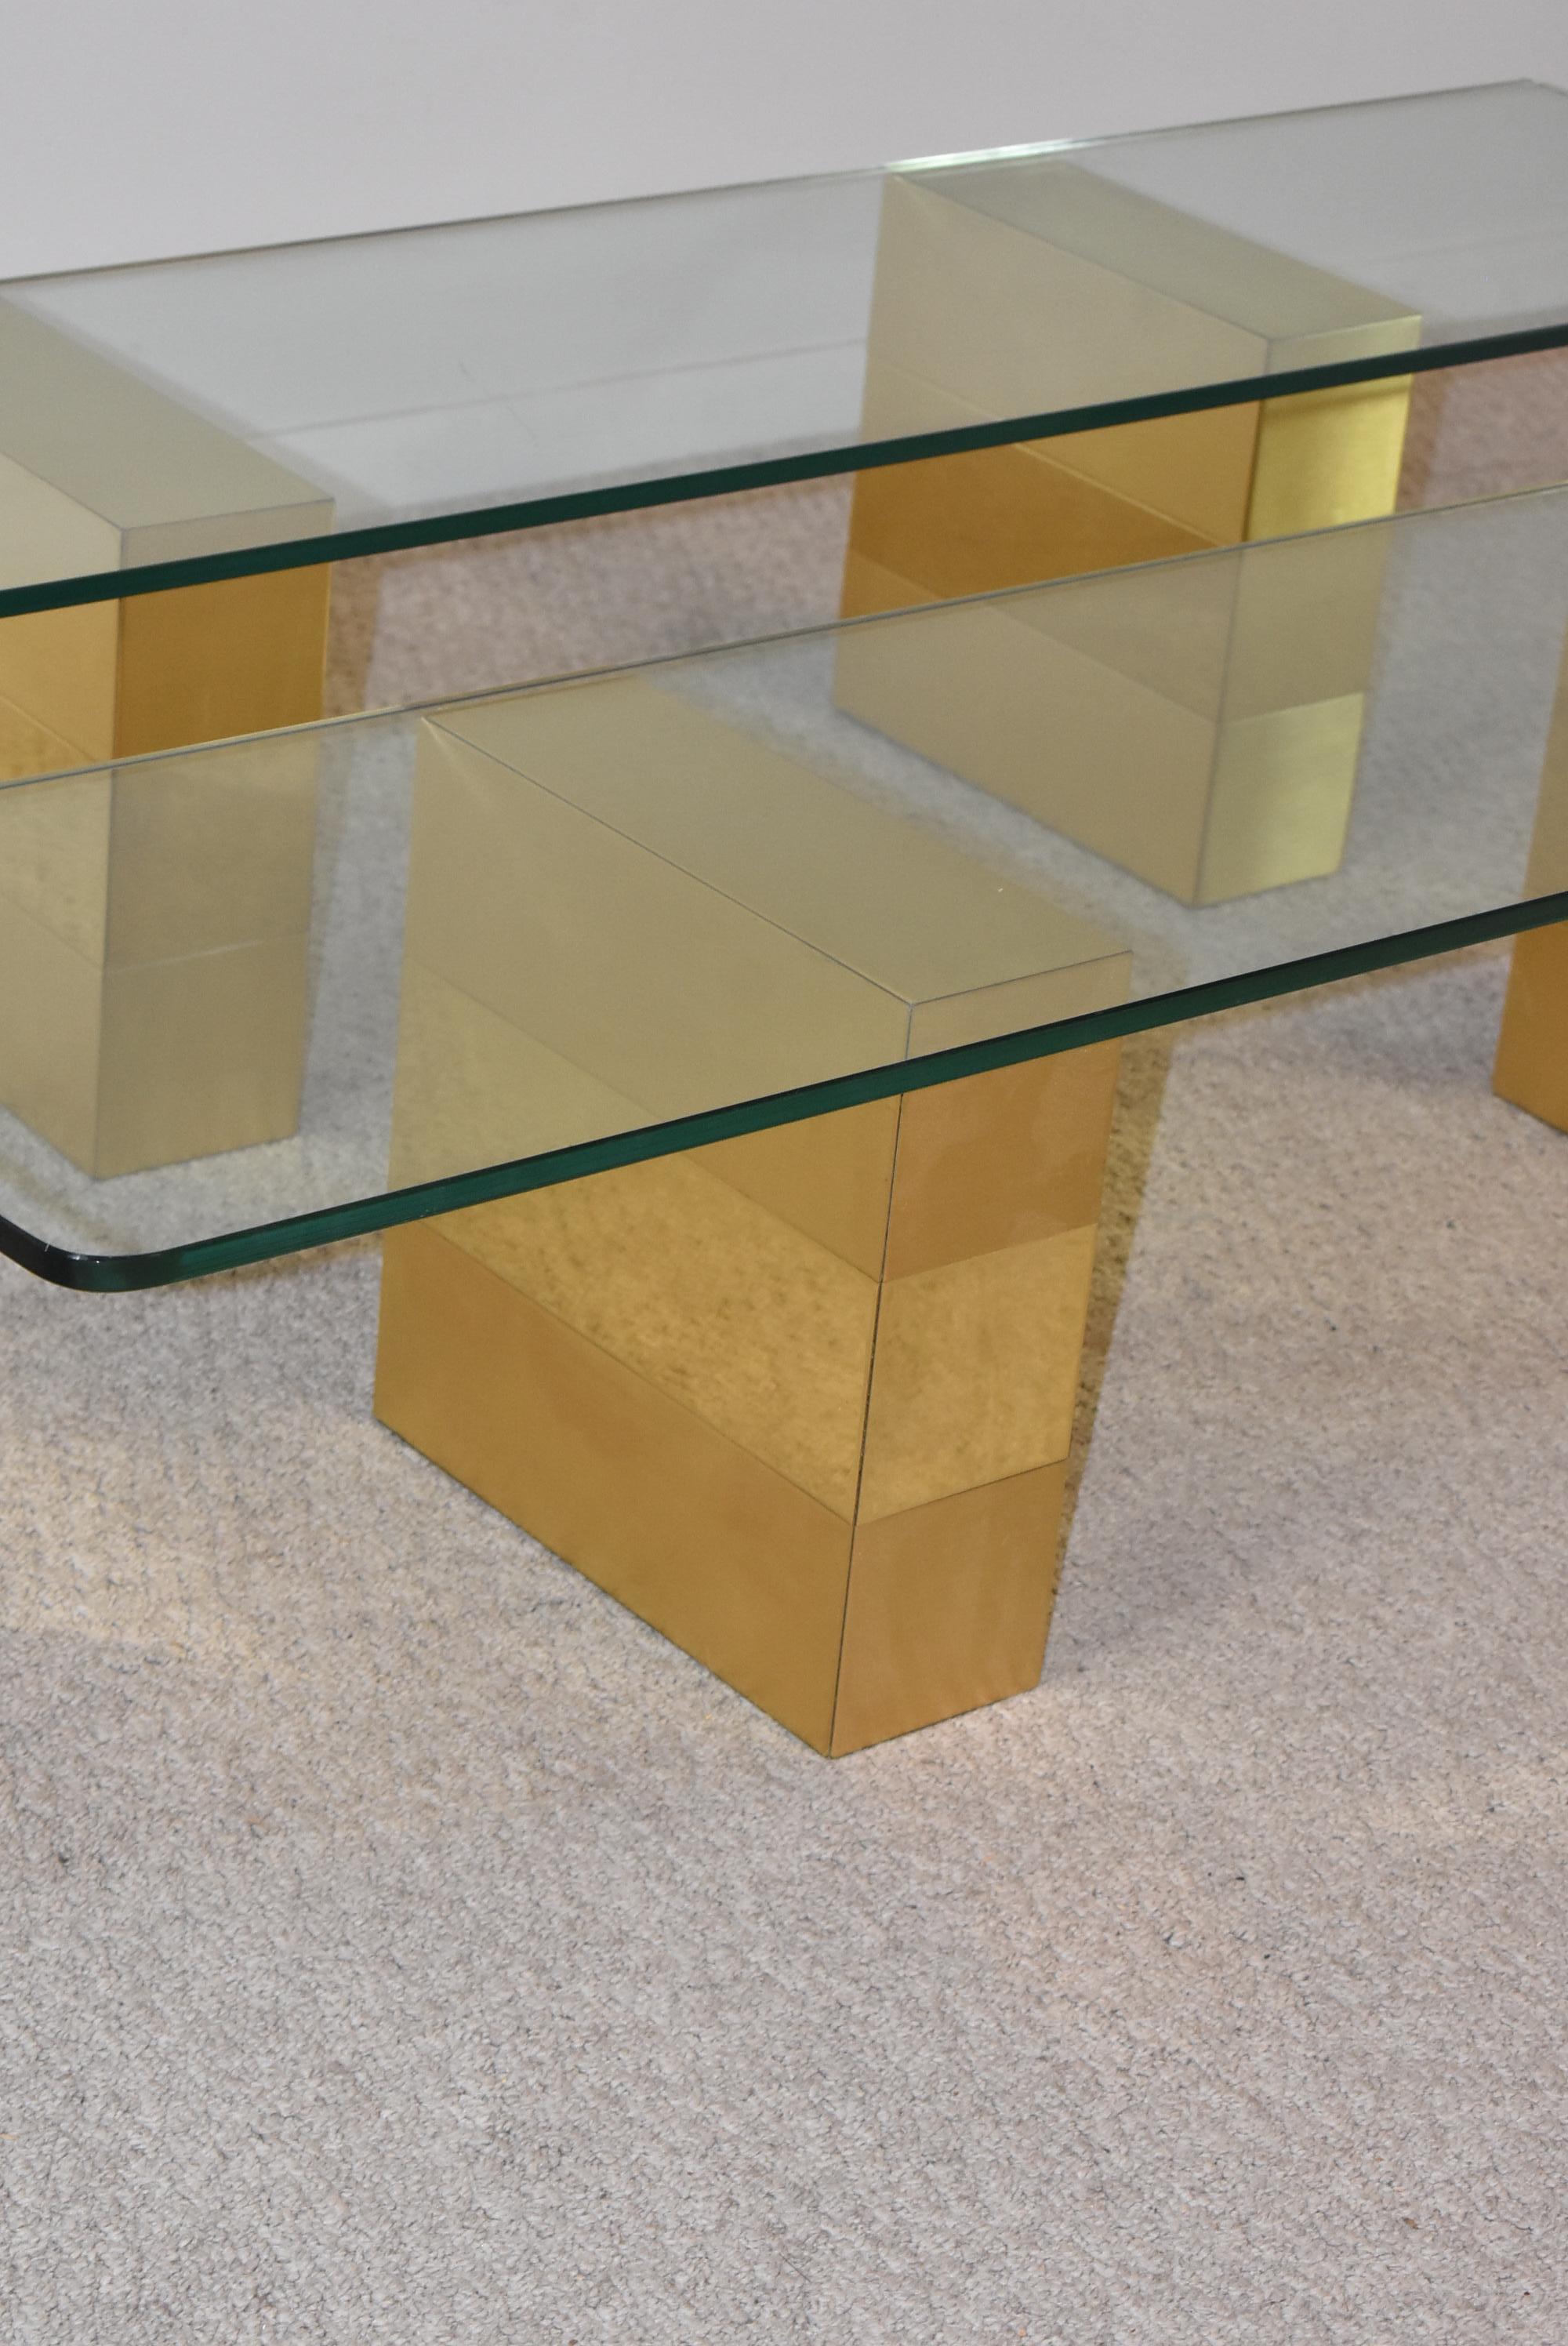 These beautiful brass and glass cityscape shelves by Paul Evans could be used as a floating shelf or a floating credenza. The brass bases are 14